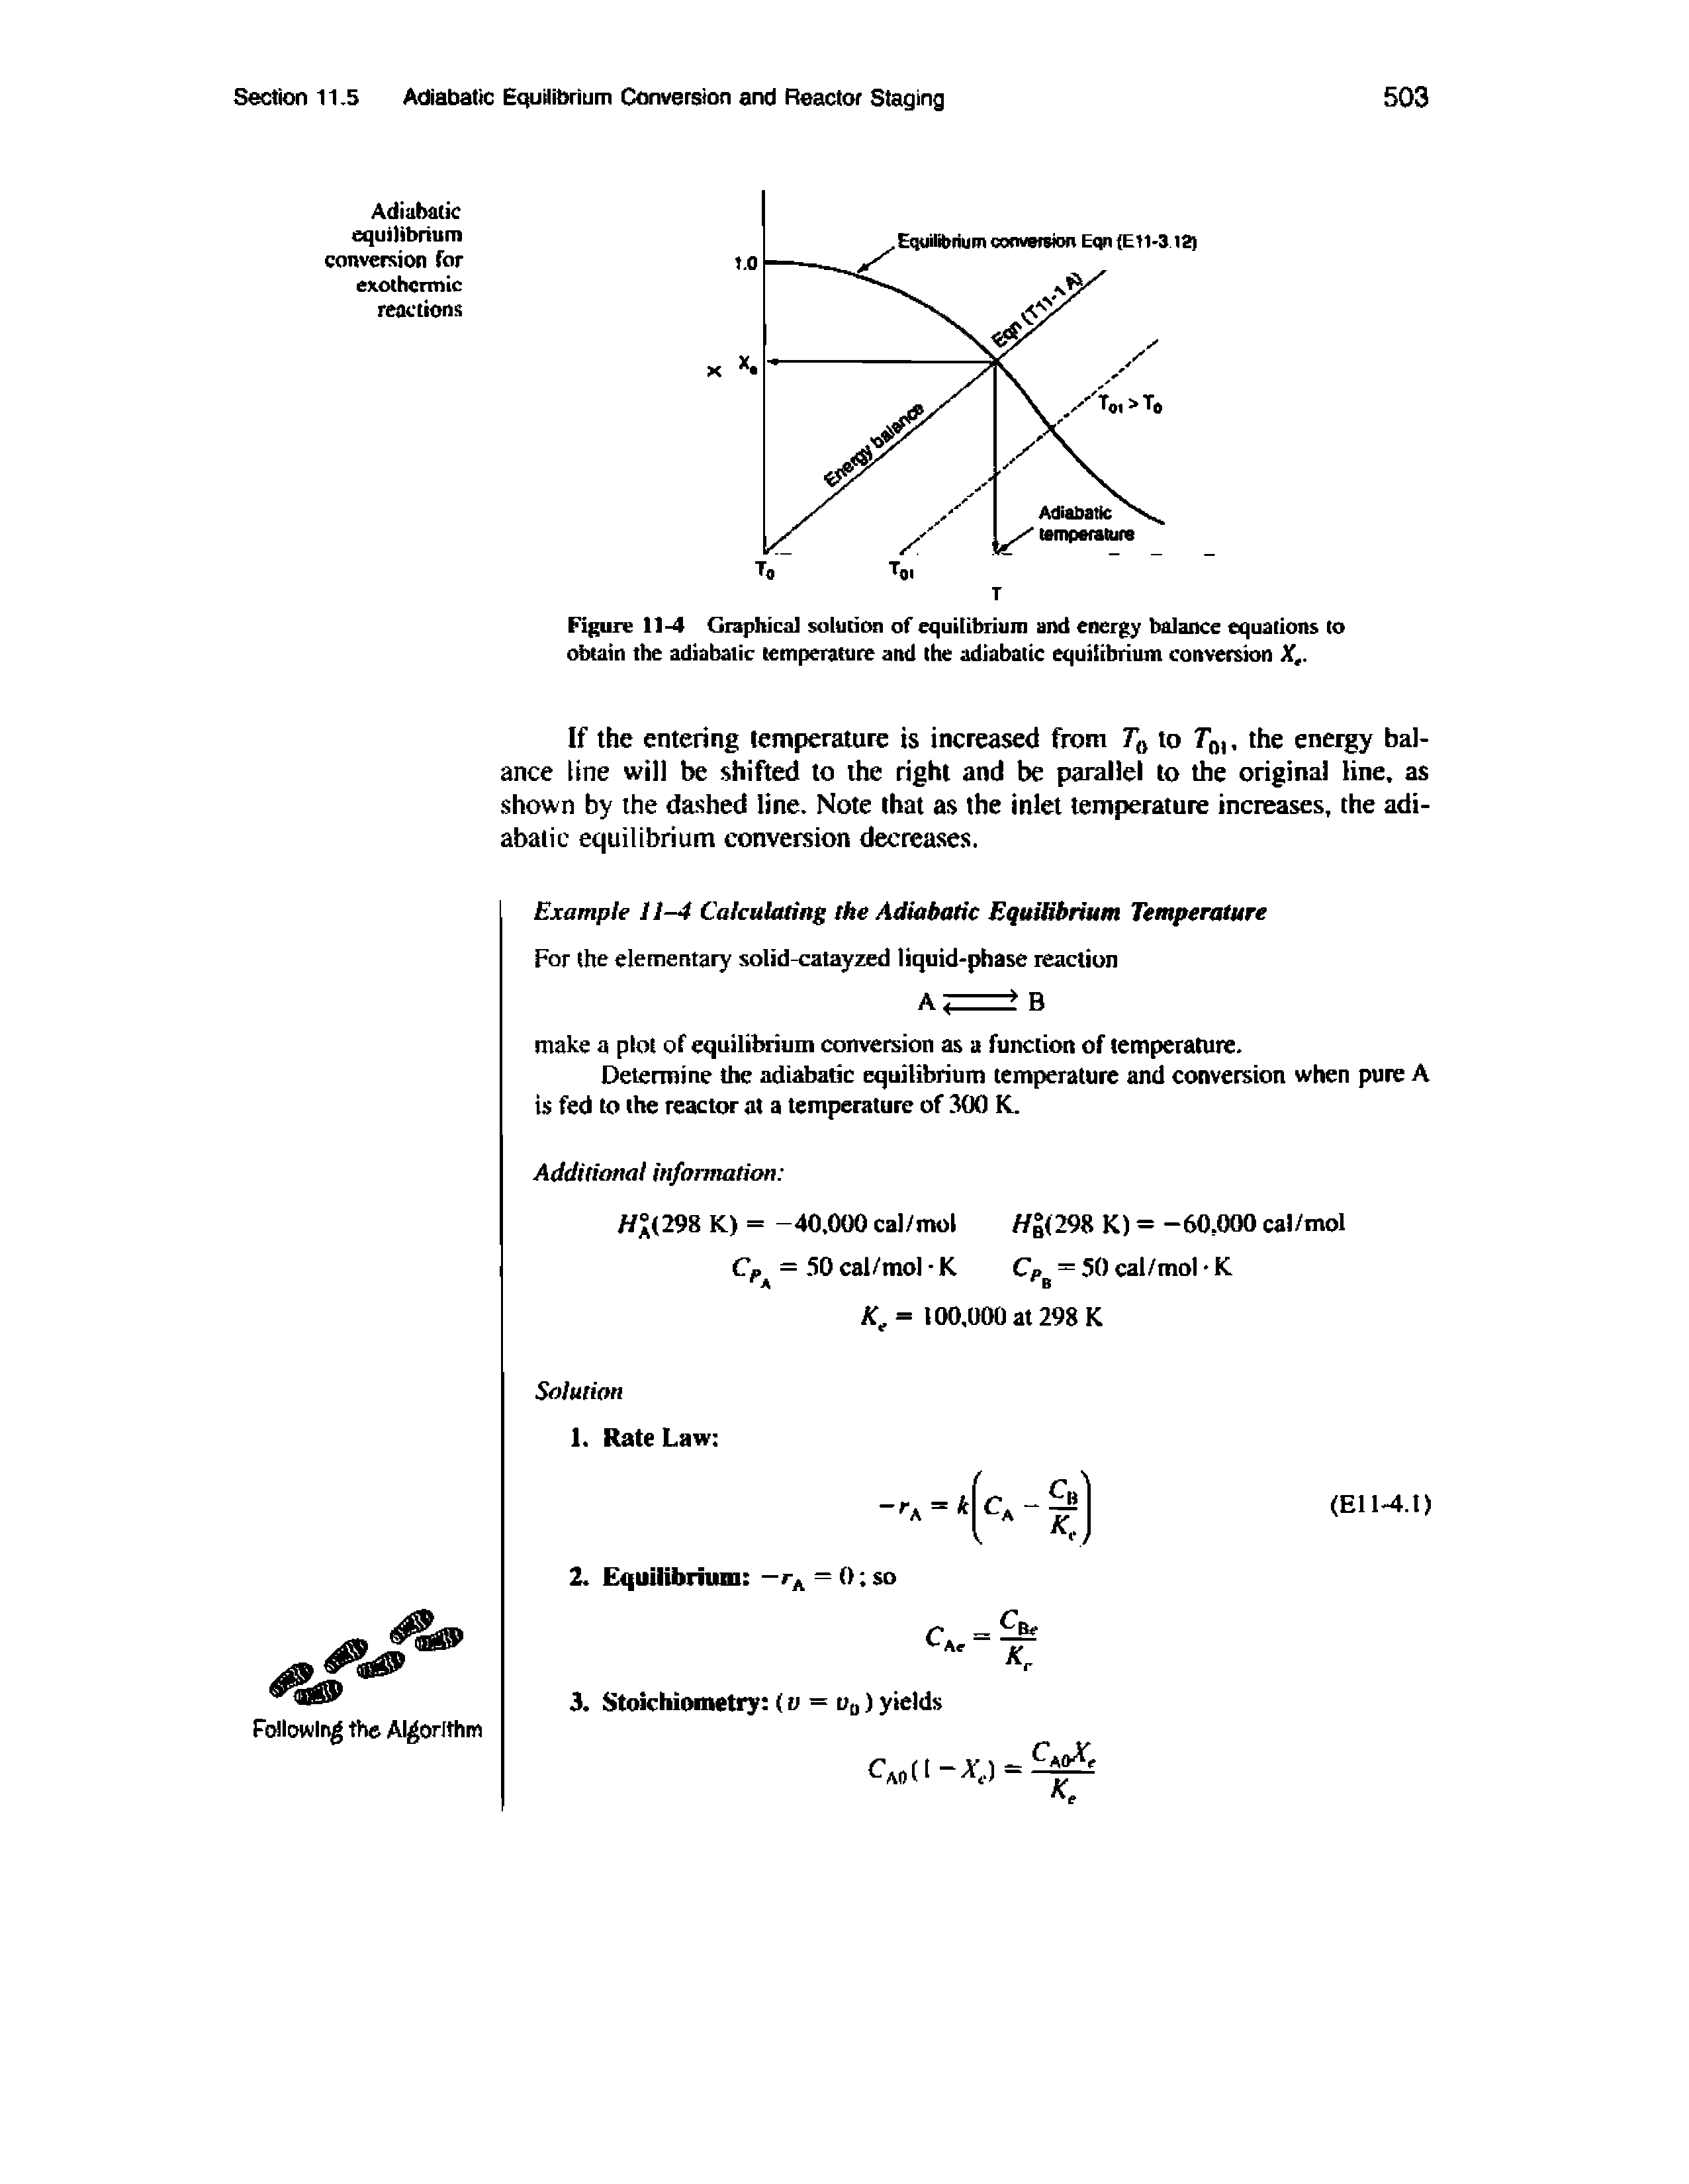 Figure 11-4 Graphical solution of equitibrium and energy balance equations to obtain the adiabatic temperature and the adiabatic equilibrium conversion X,.